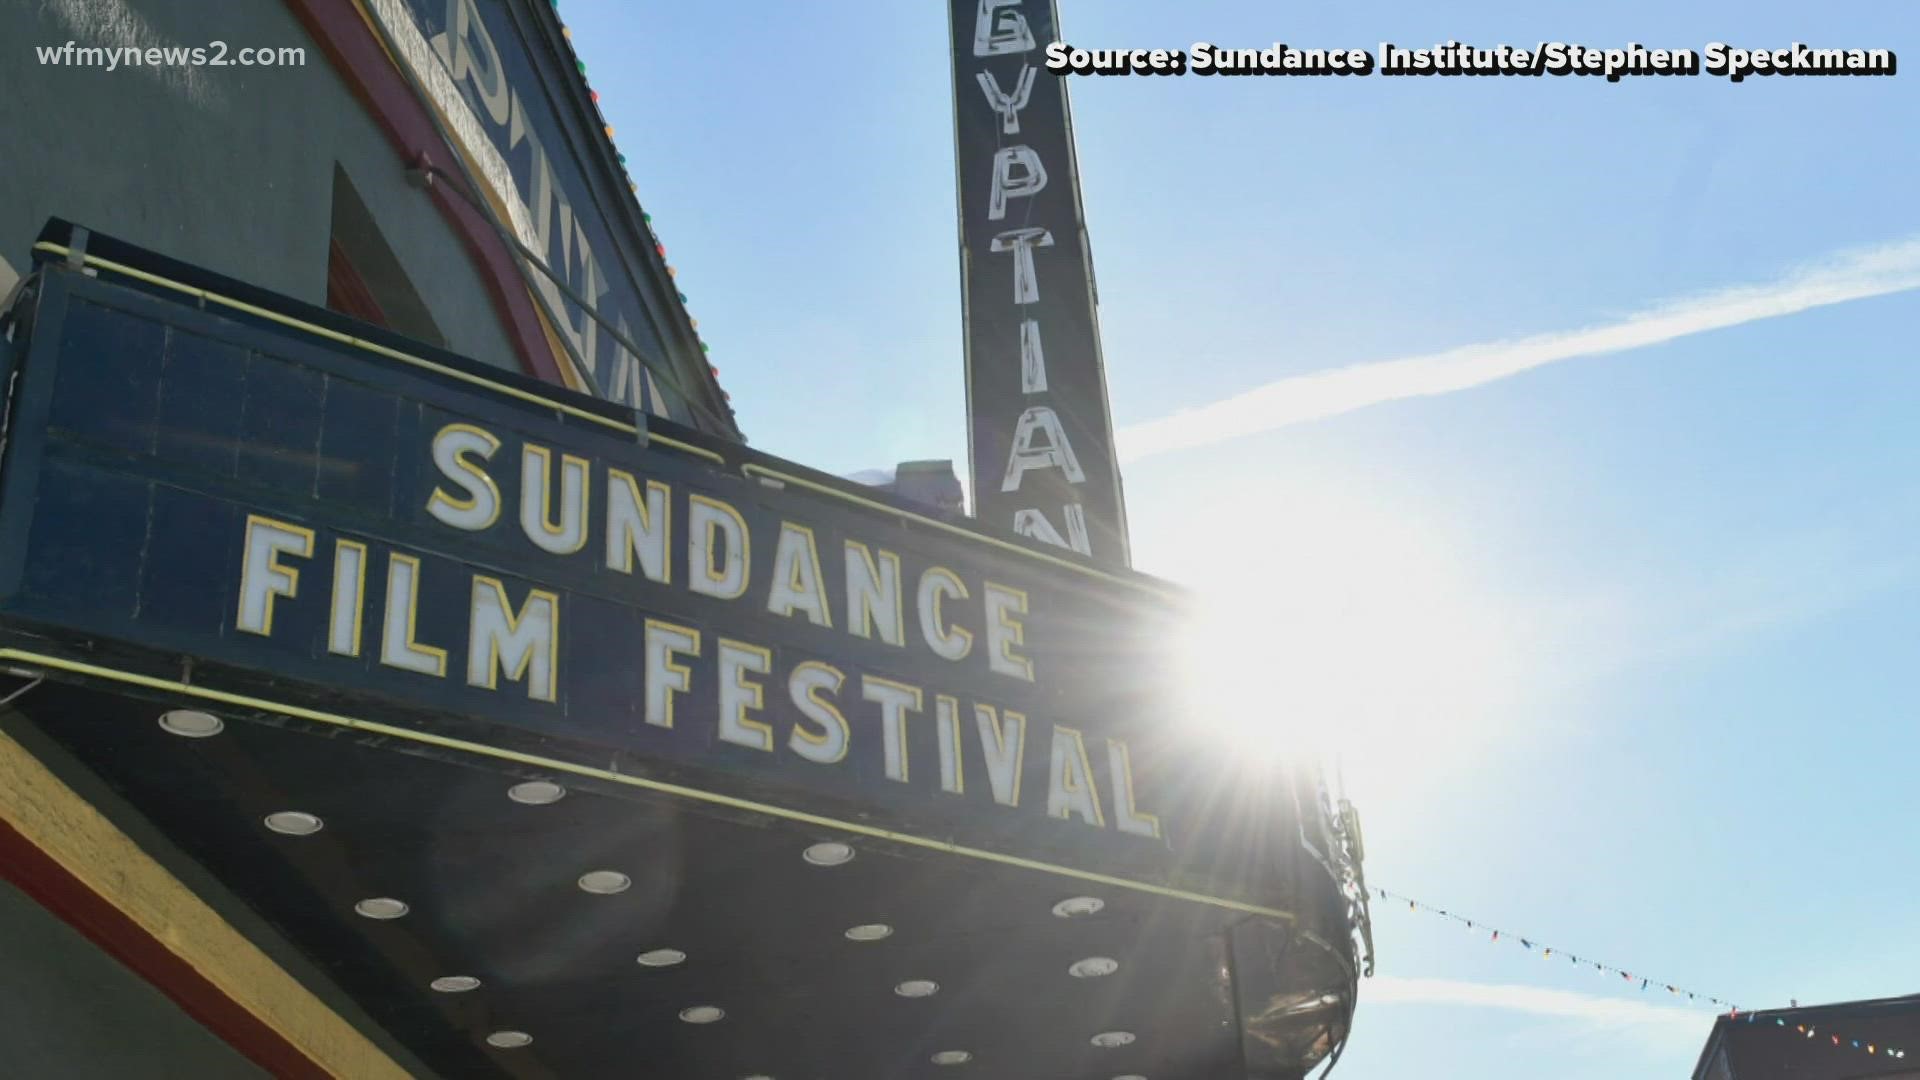 WFMY News 2’s photojournalist Manning Franks explains how you can watch films screened at the Sundance film festival.